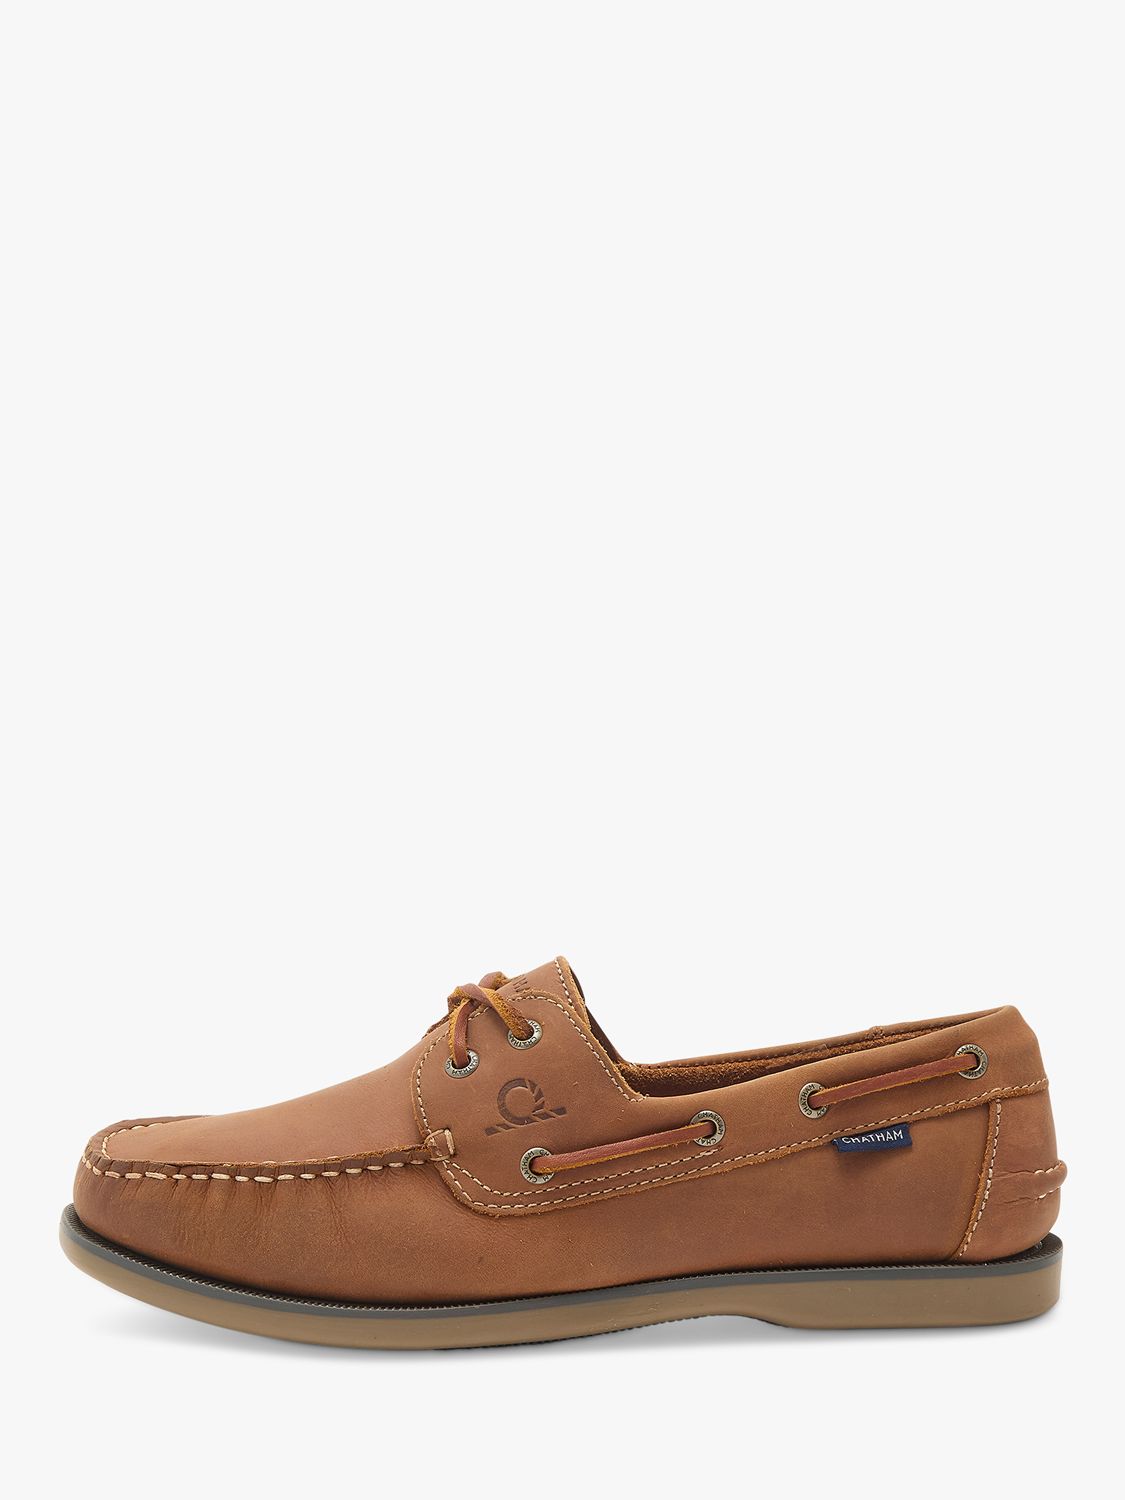 Chatham Whitstable Leather Boat Shoes, Tan, 7